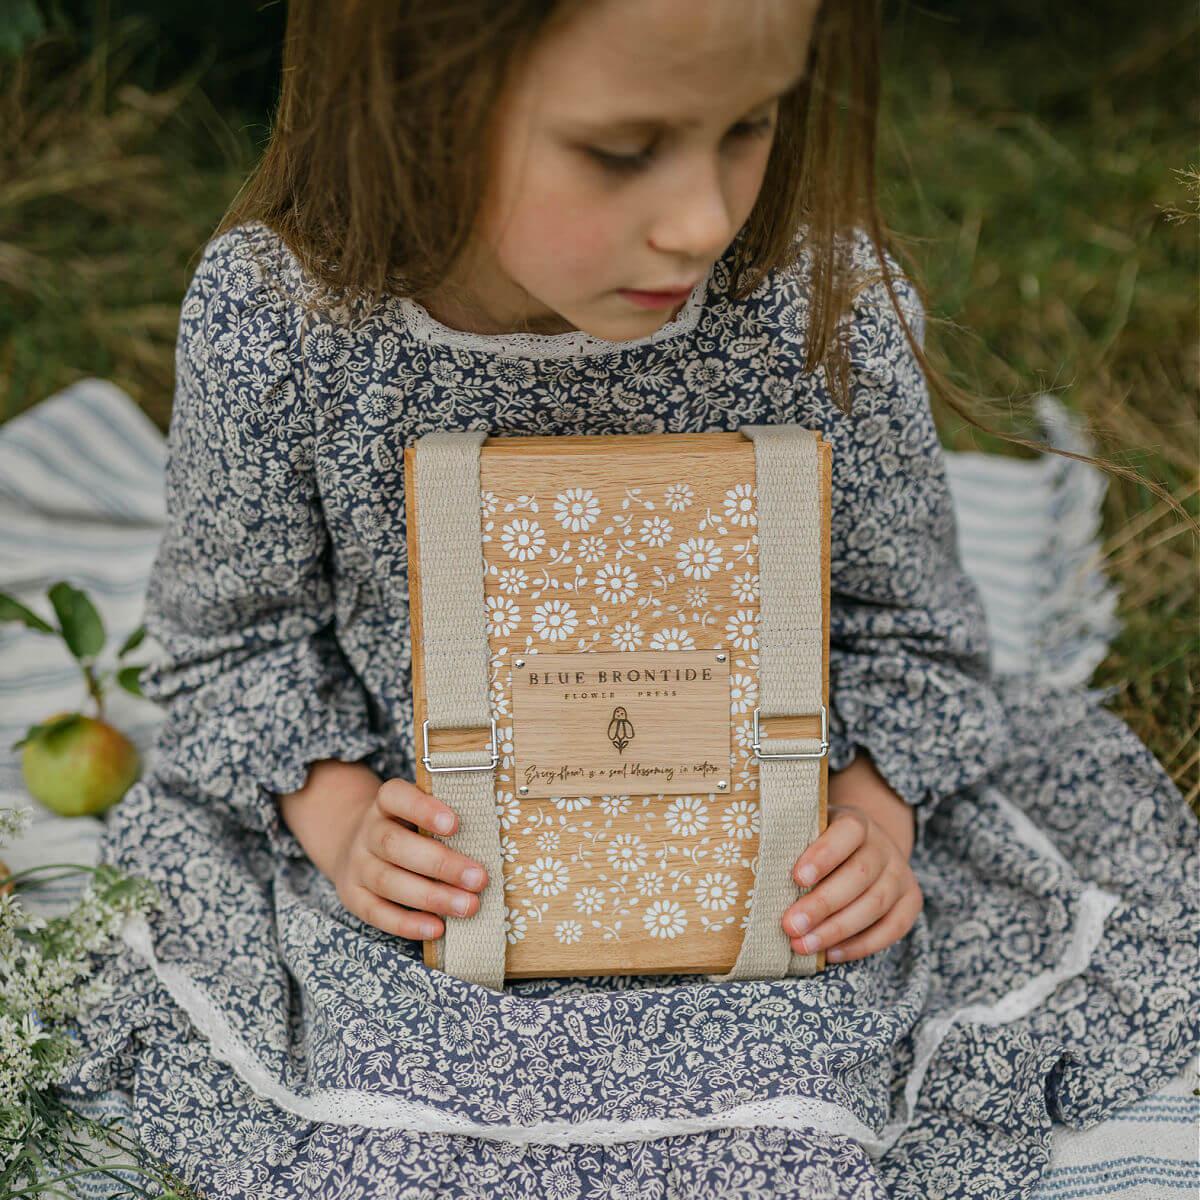 wooden flower press with straps in delicate daisy, flower pressing at blue brontide uk